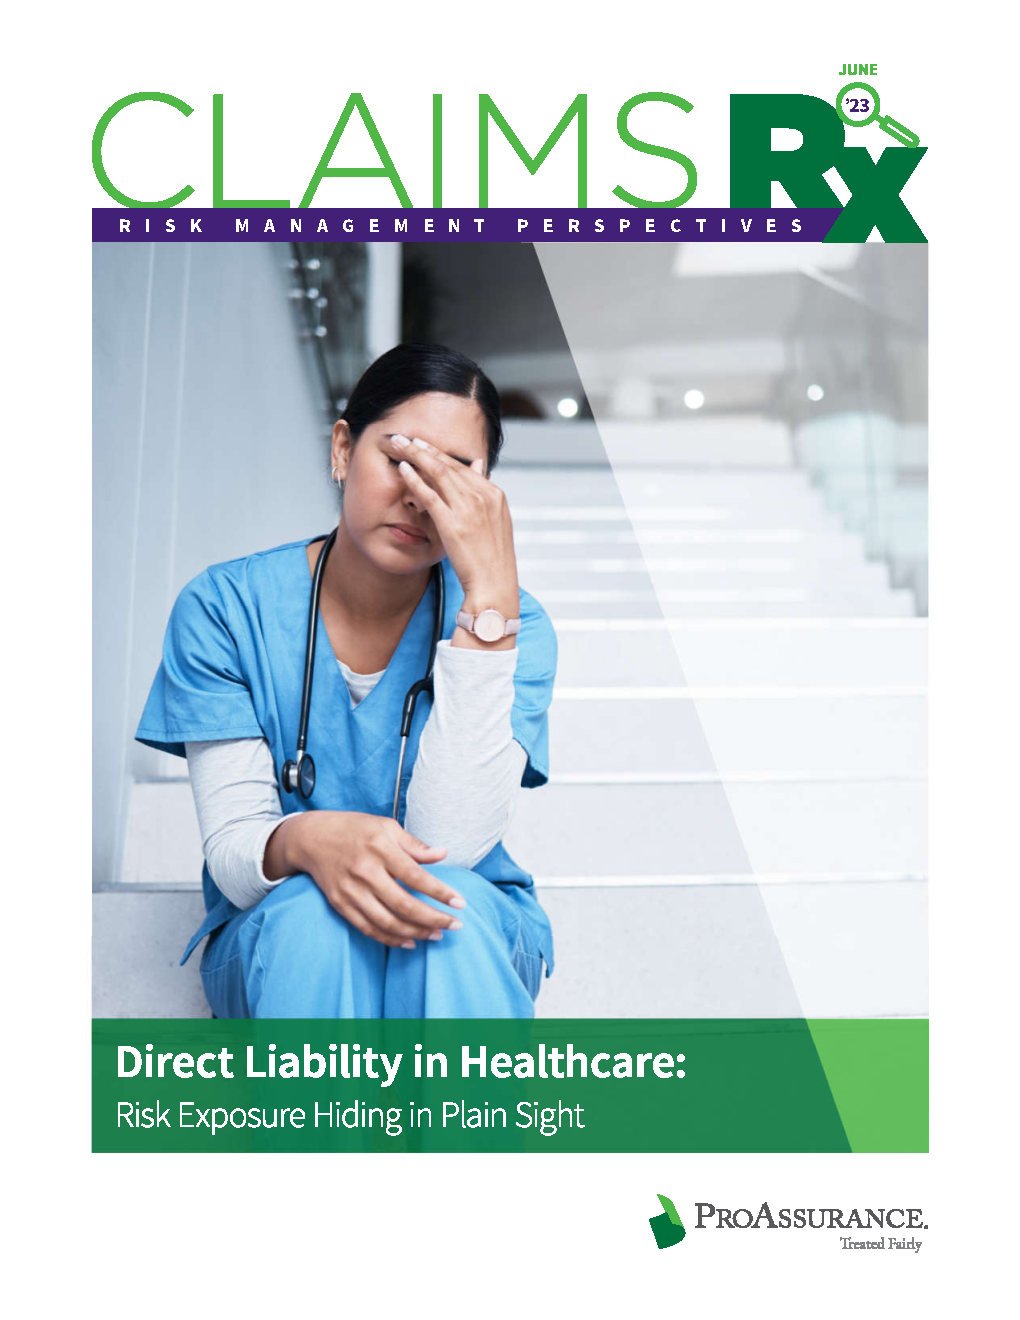 Direct Liability in Healthcare